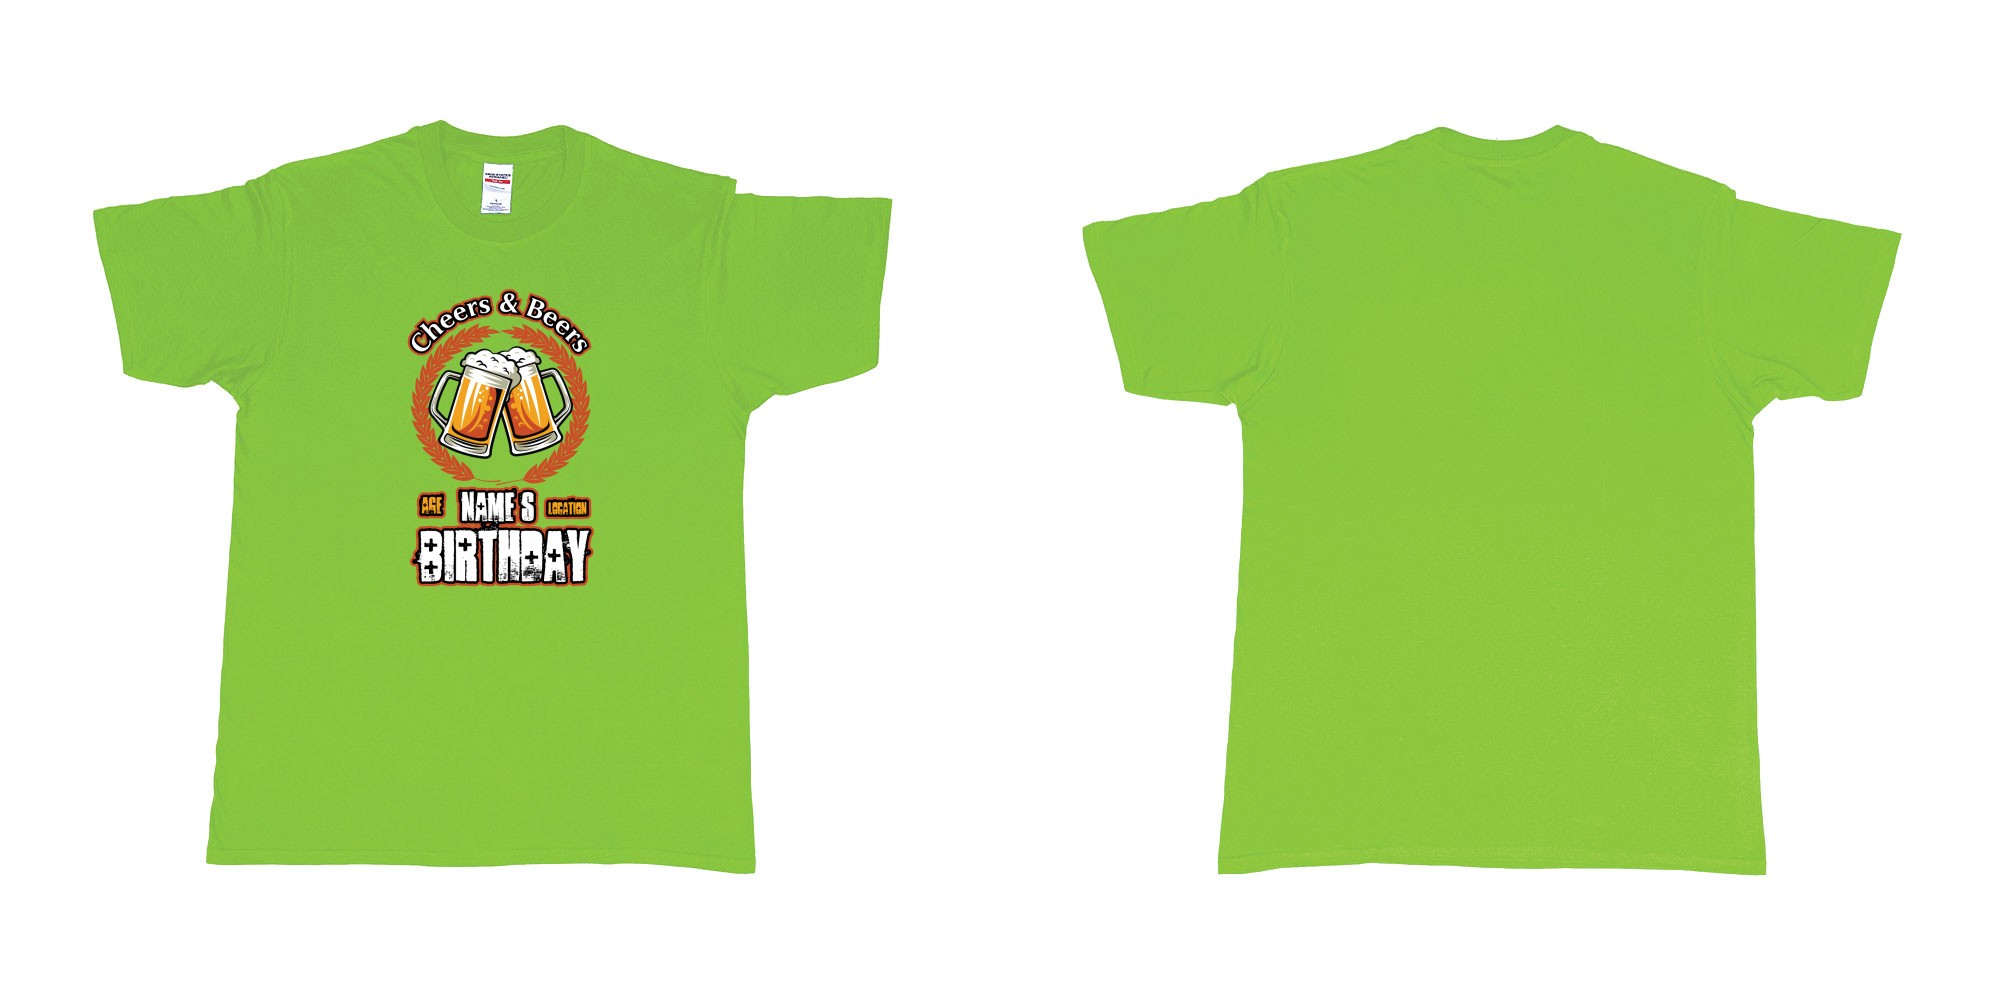 Custom tshirt design cheers and beers birthday in fabric color lime choice your own text made in Bali by The Pirate Way